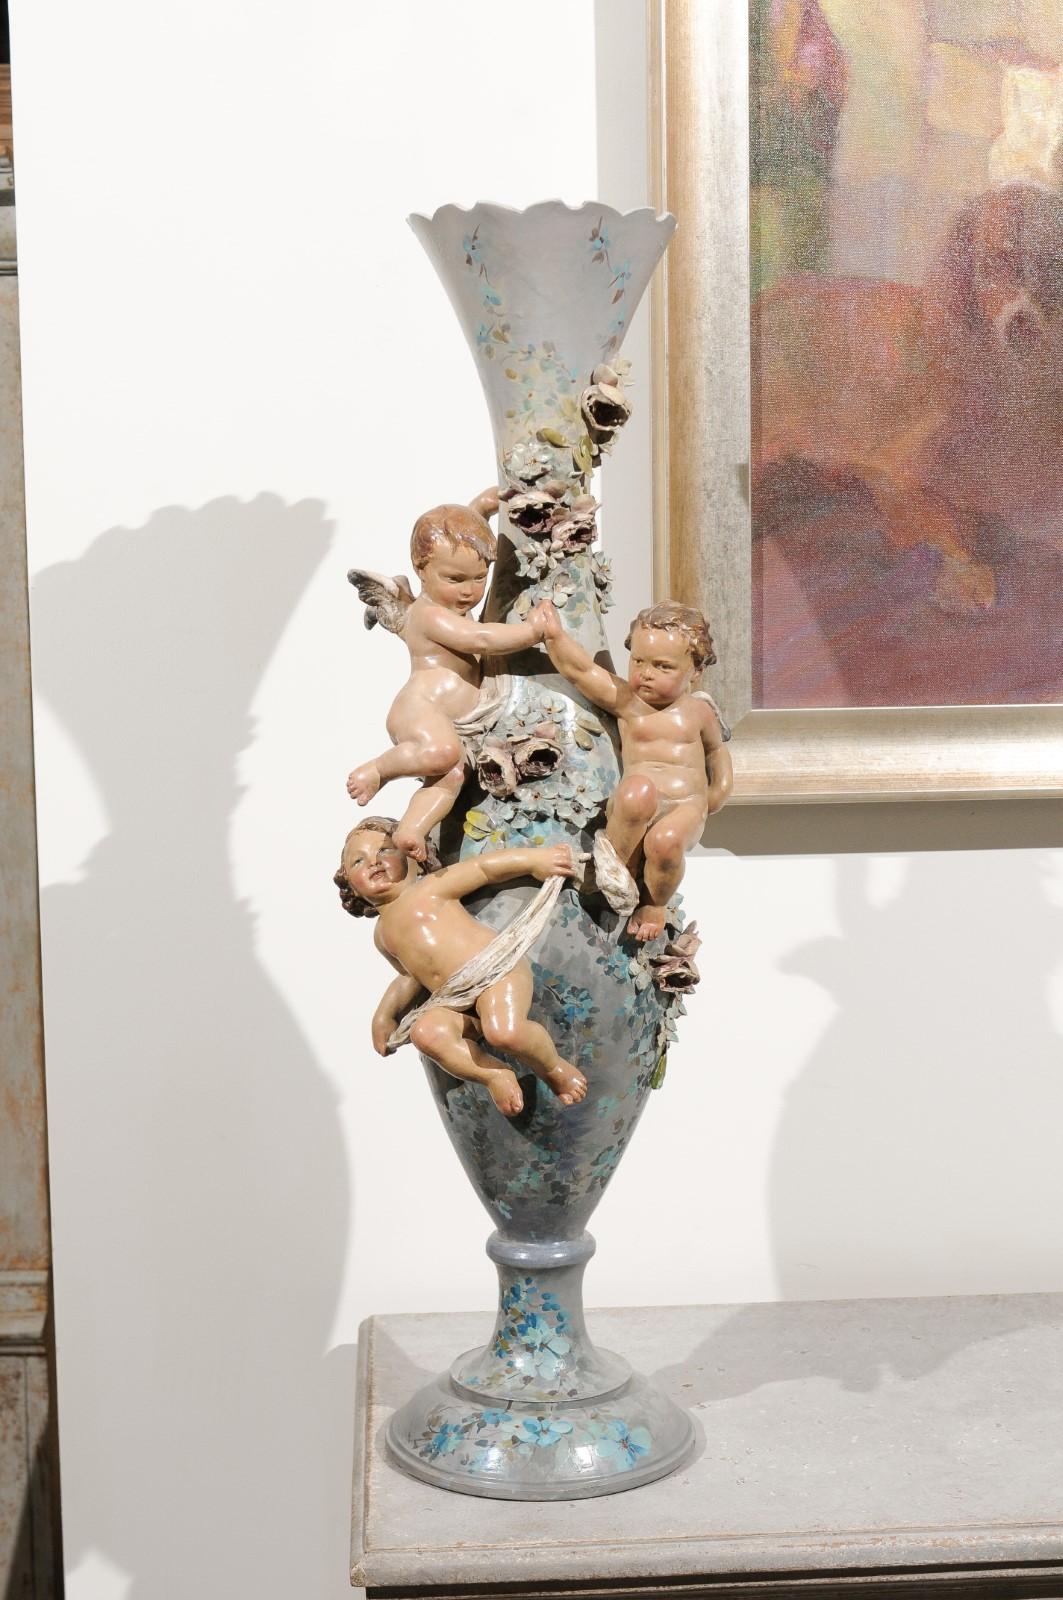 French 1870s Slender Majolica Vase with Floral Décor and High-Relief Cherubs For Sale 2